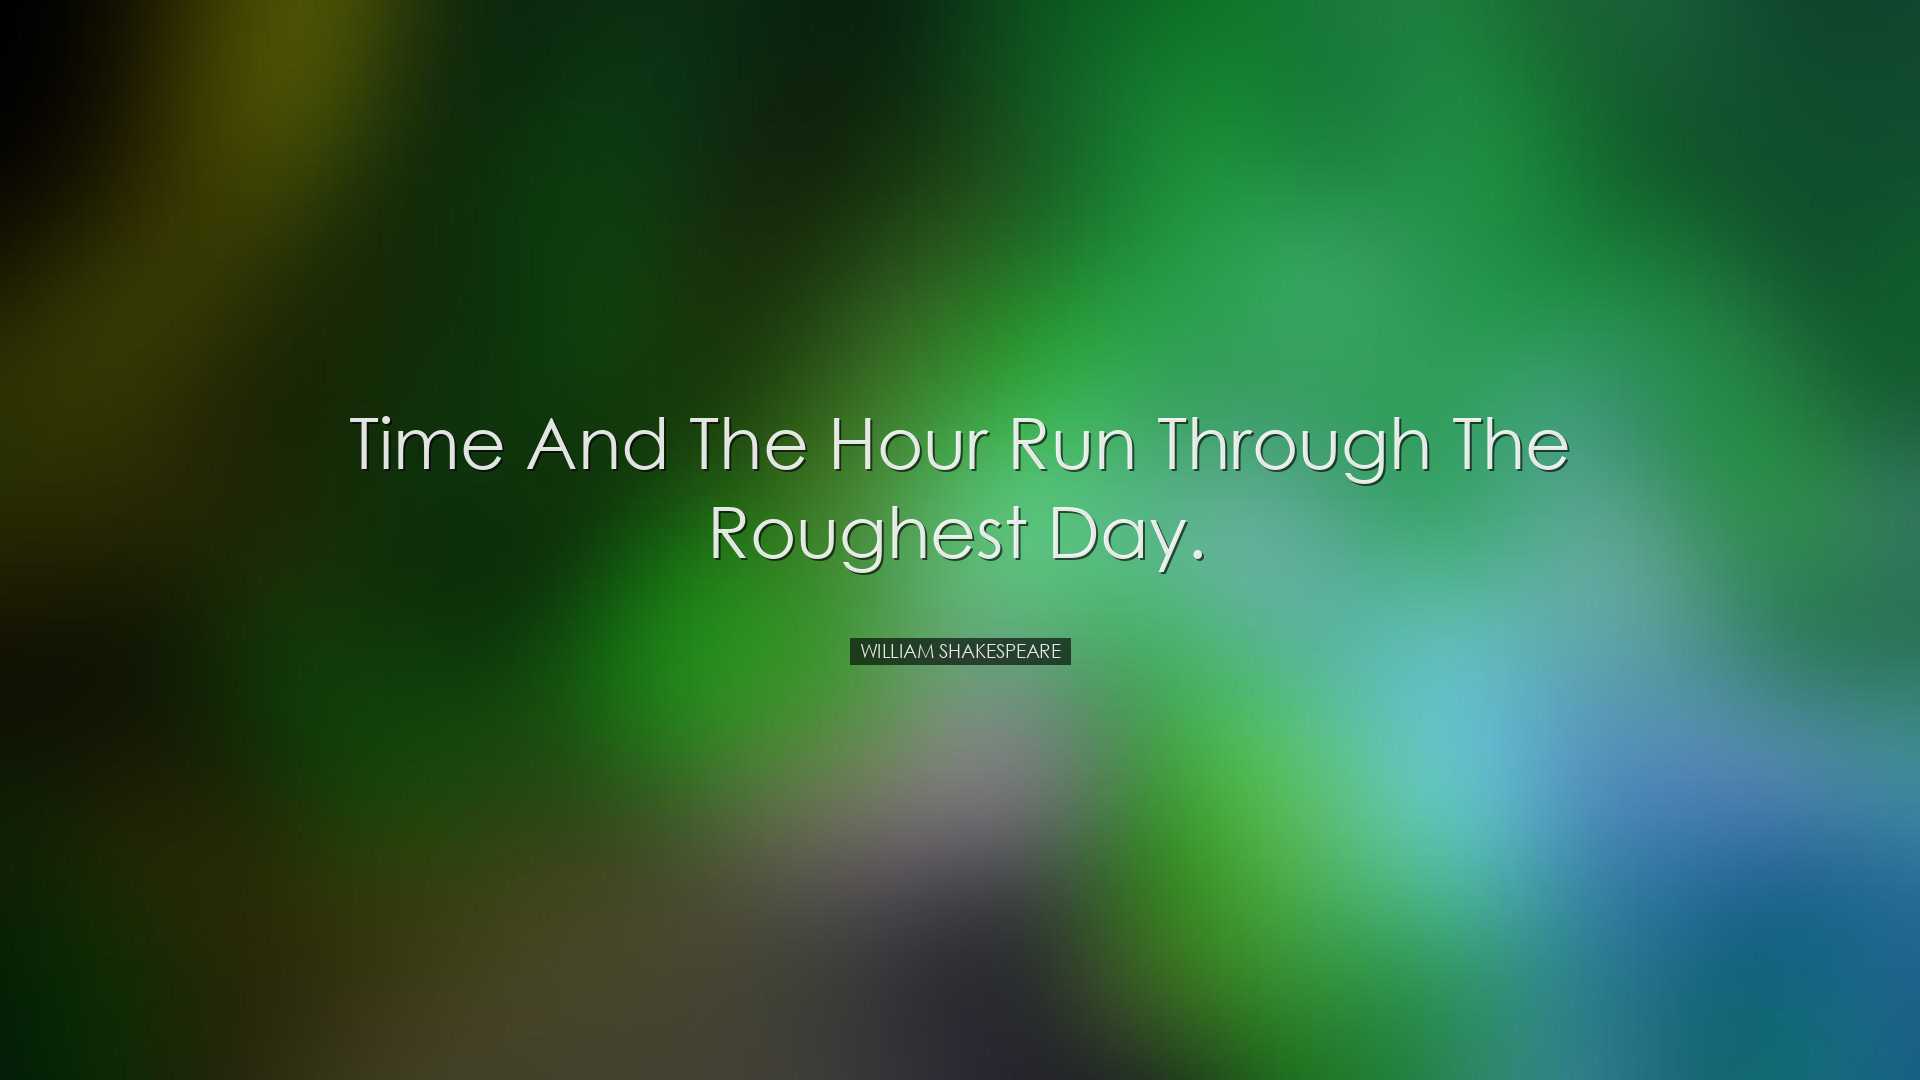 Time and the hour run through the roughest day. - William Shakespe